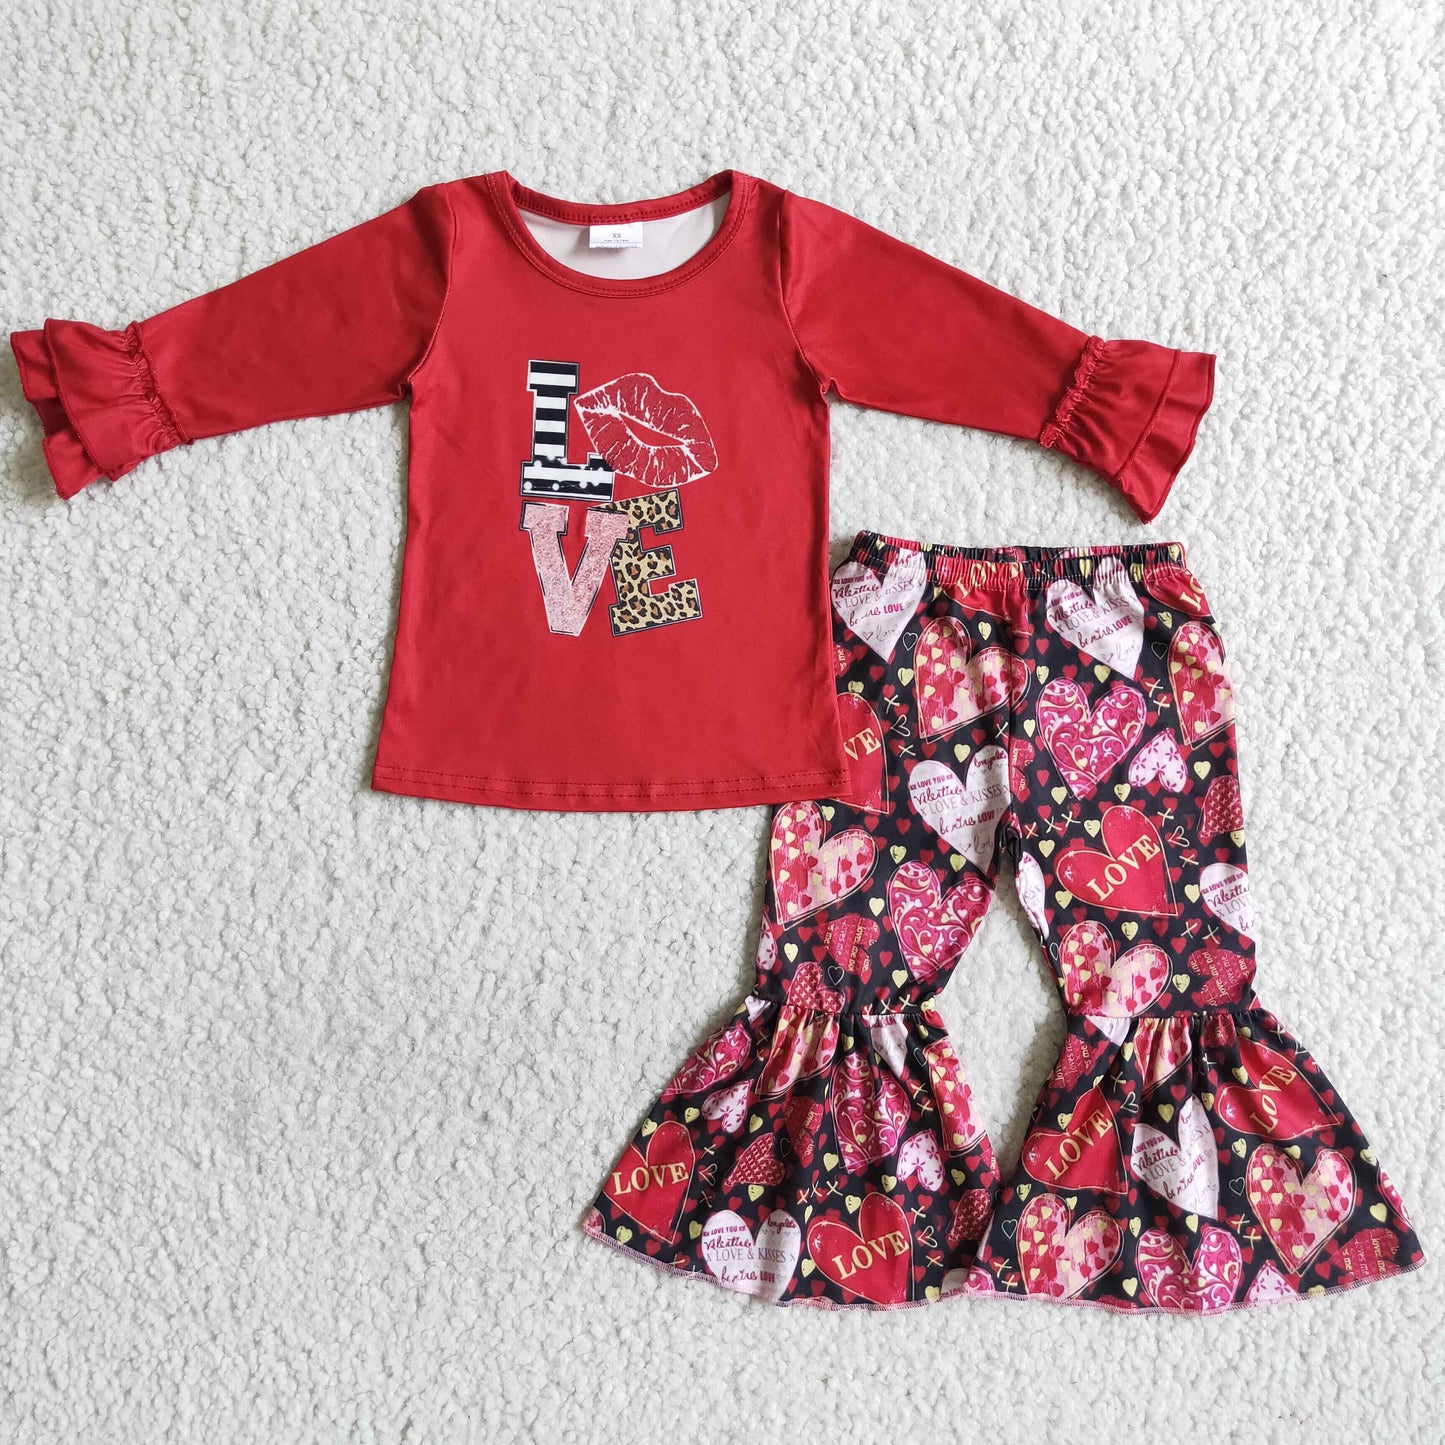 6 A2-14 Kids girl clothing set Valentine day festival clothes  girl outfits long sleeve long pants